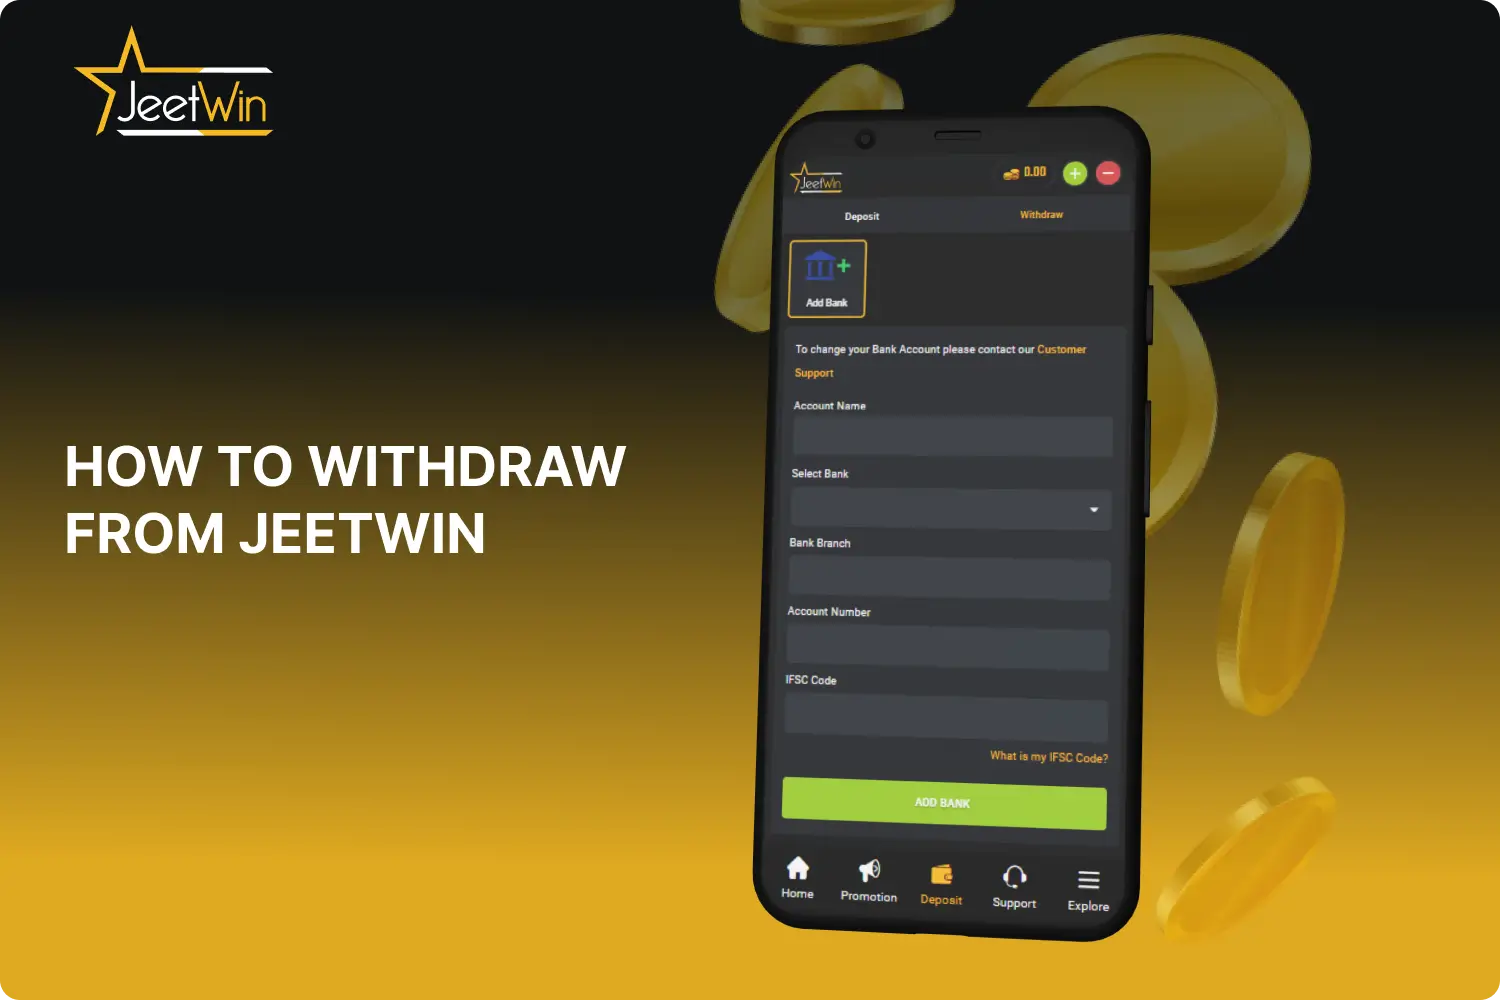 To withdraw from a Jeetwin you need to follow a few simple steps